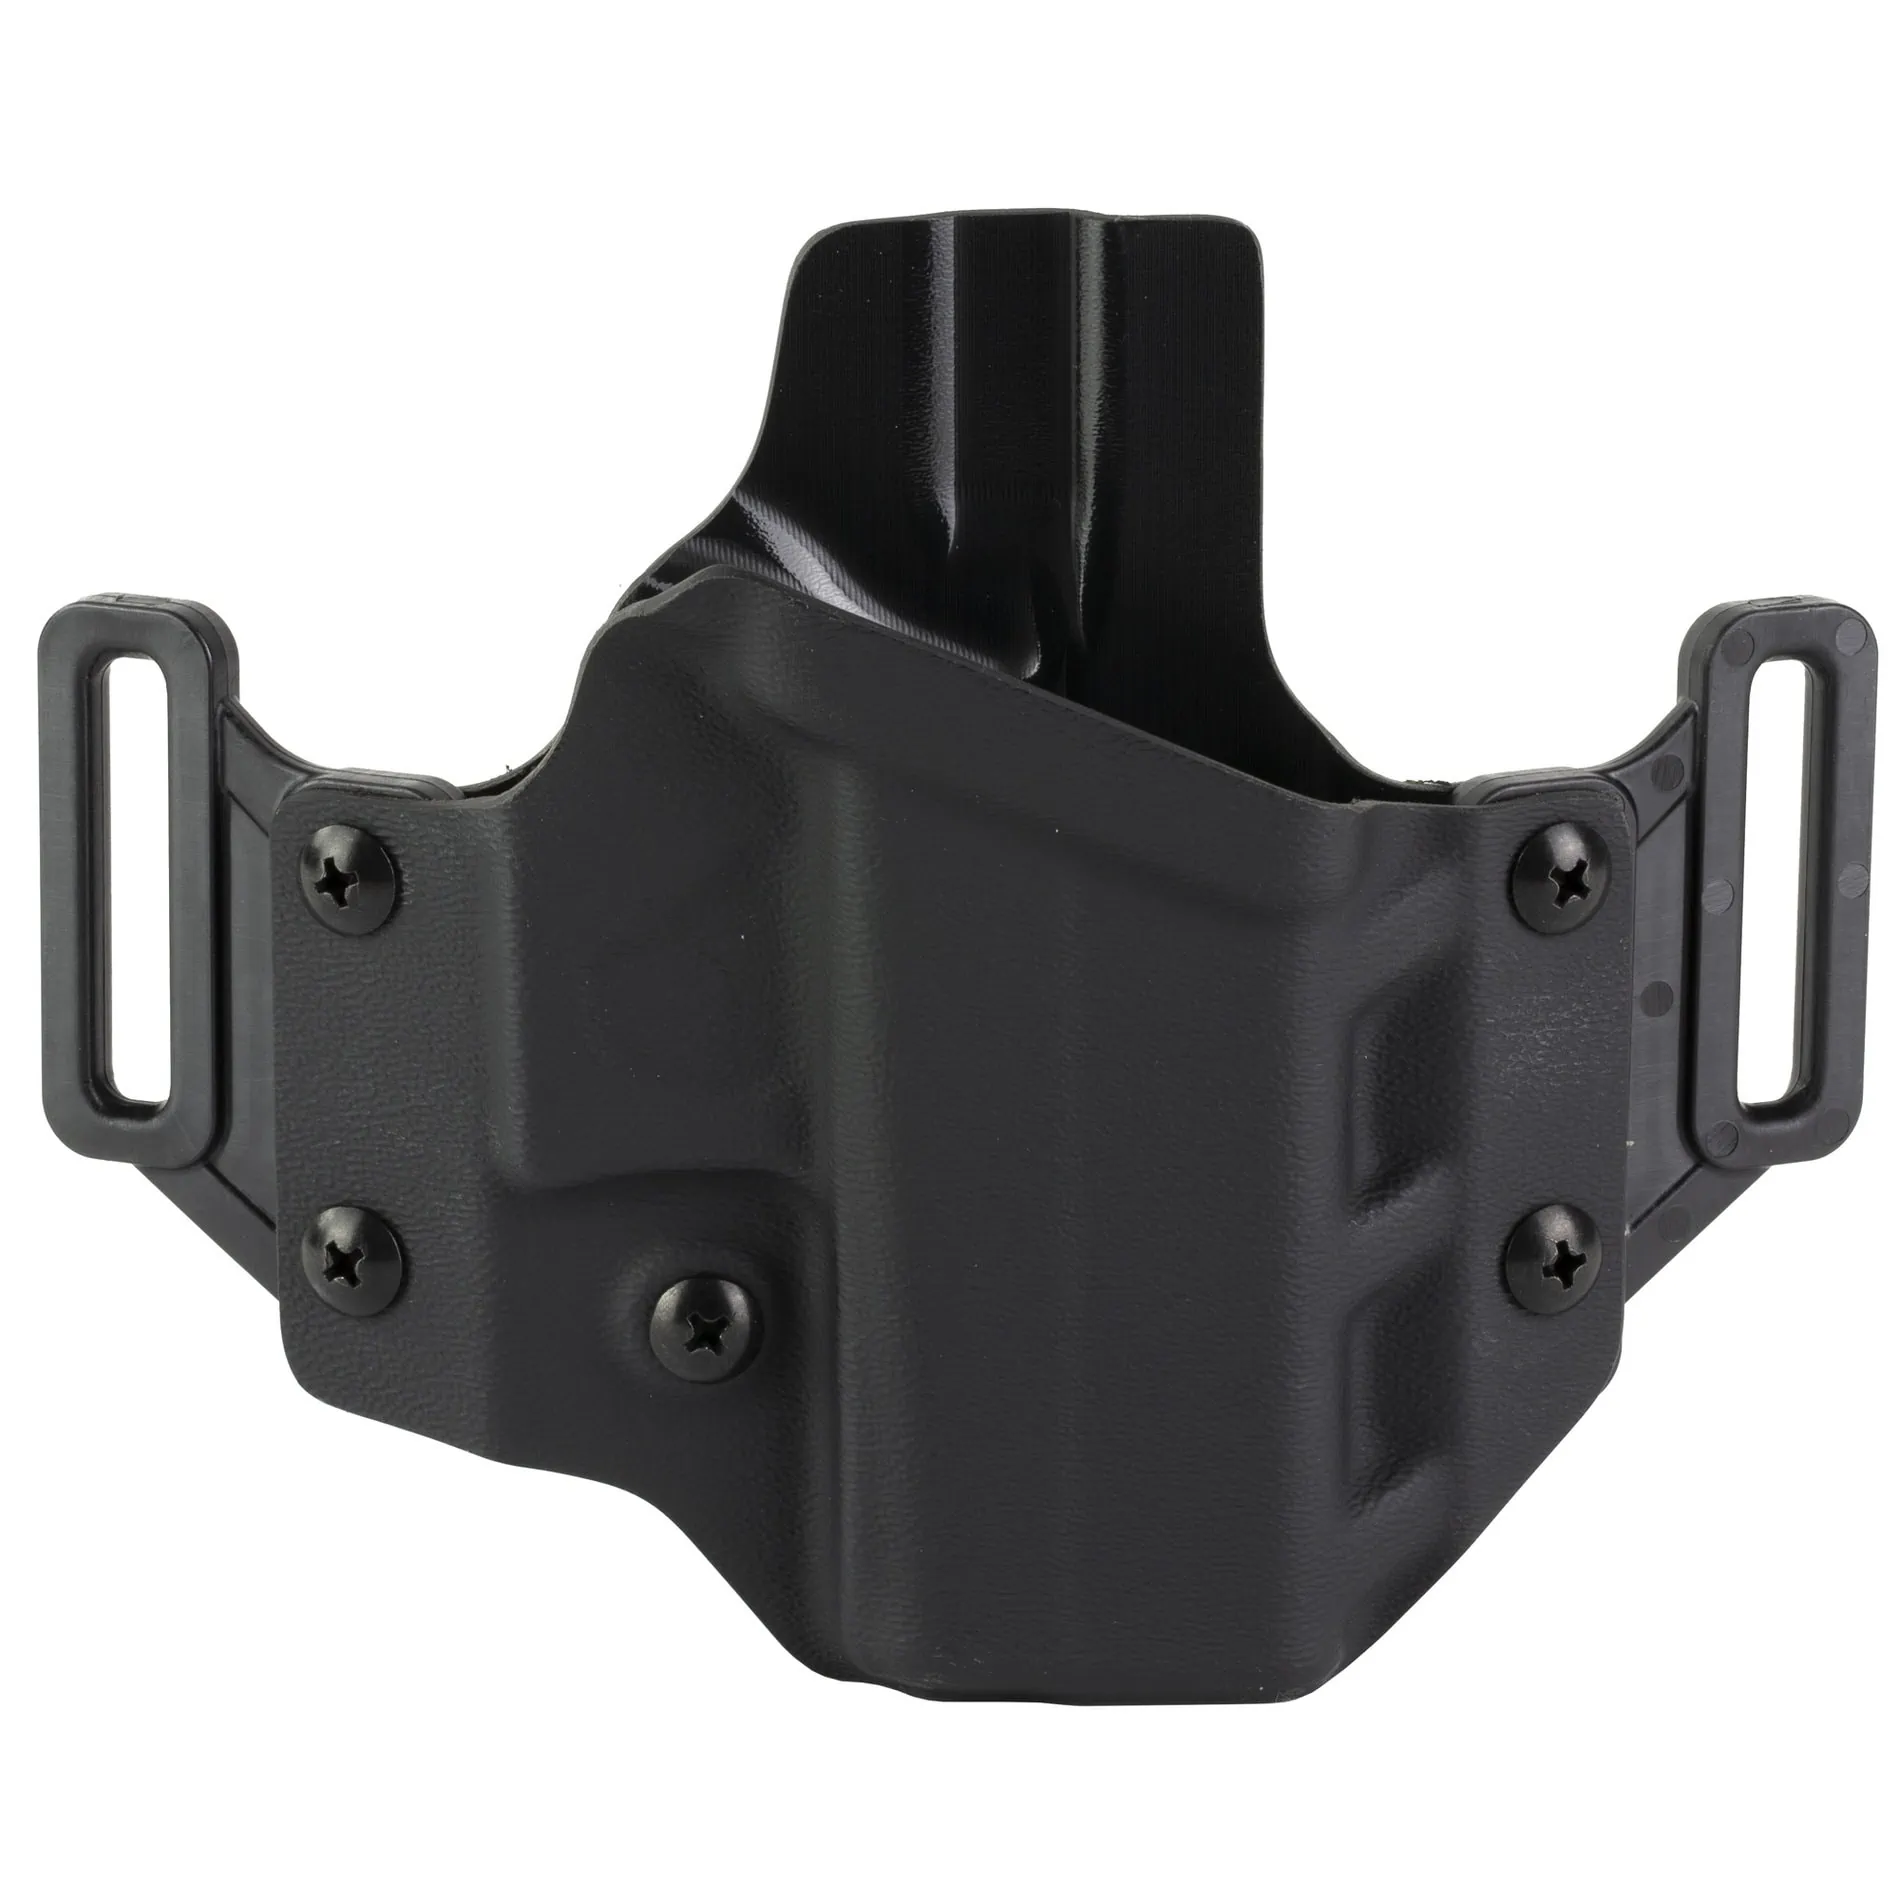 Crucial Concealment Covert OWB Right Handed Kydex Holster